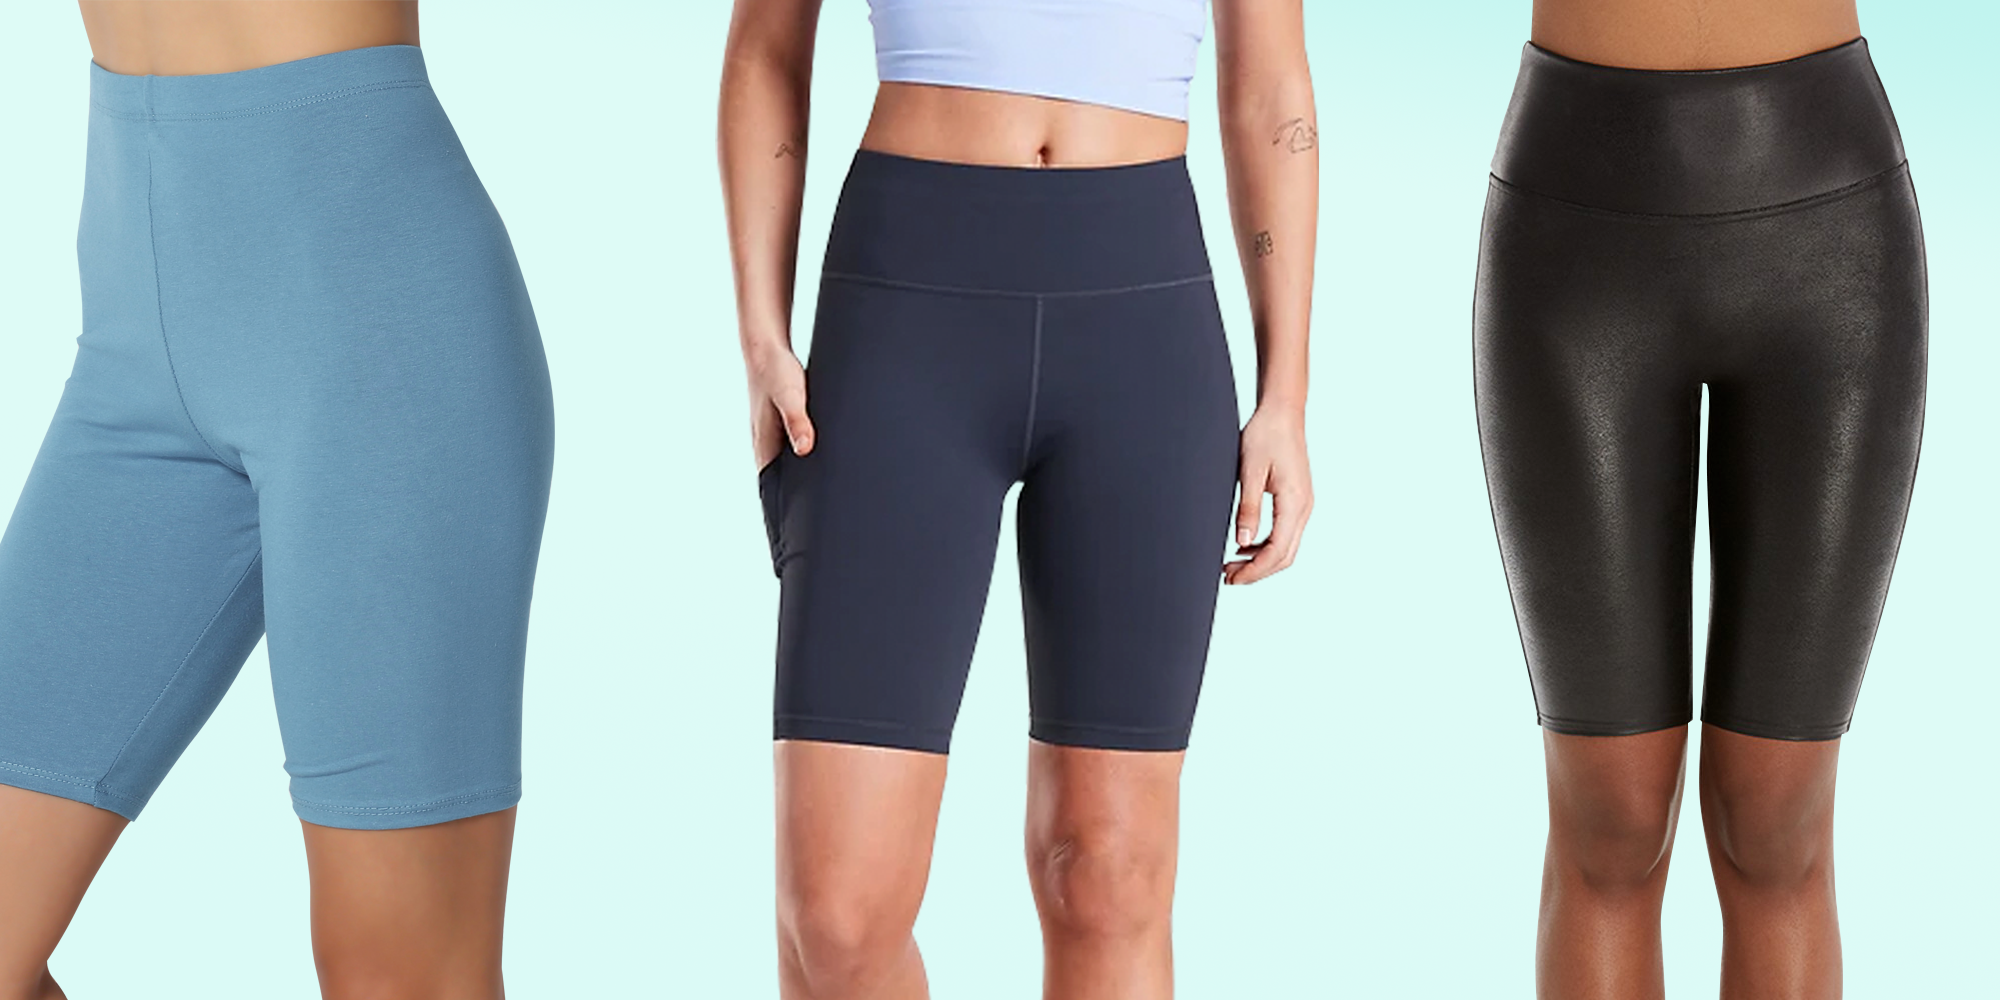 The Best Padded Cycling Underwear for Women - Total